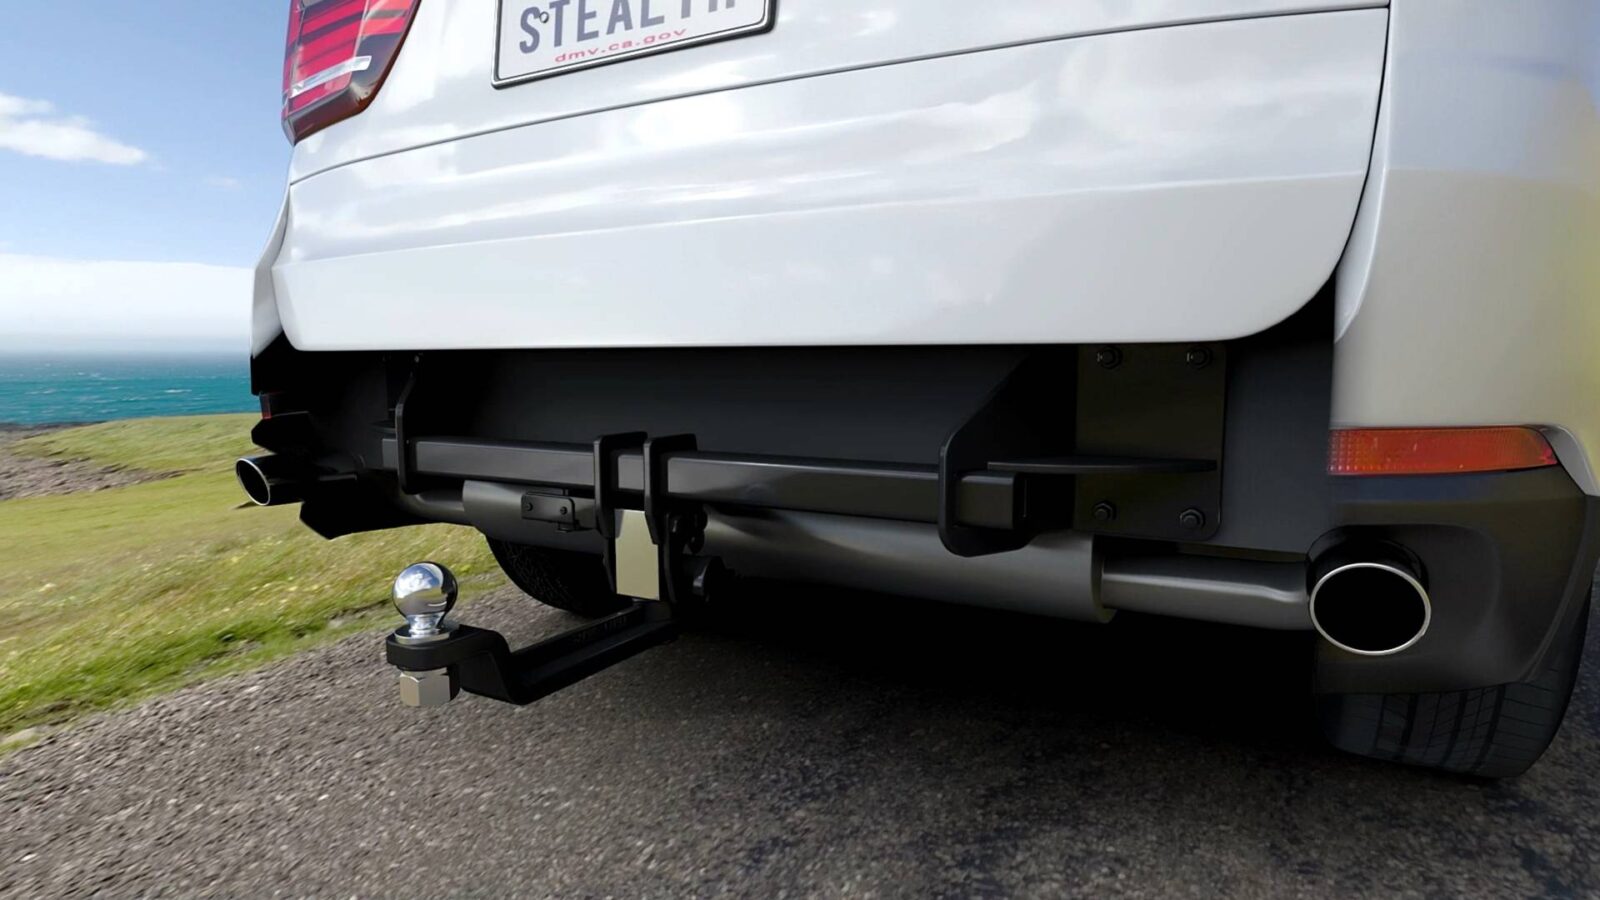 Stealth Hitch